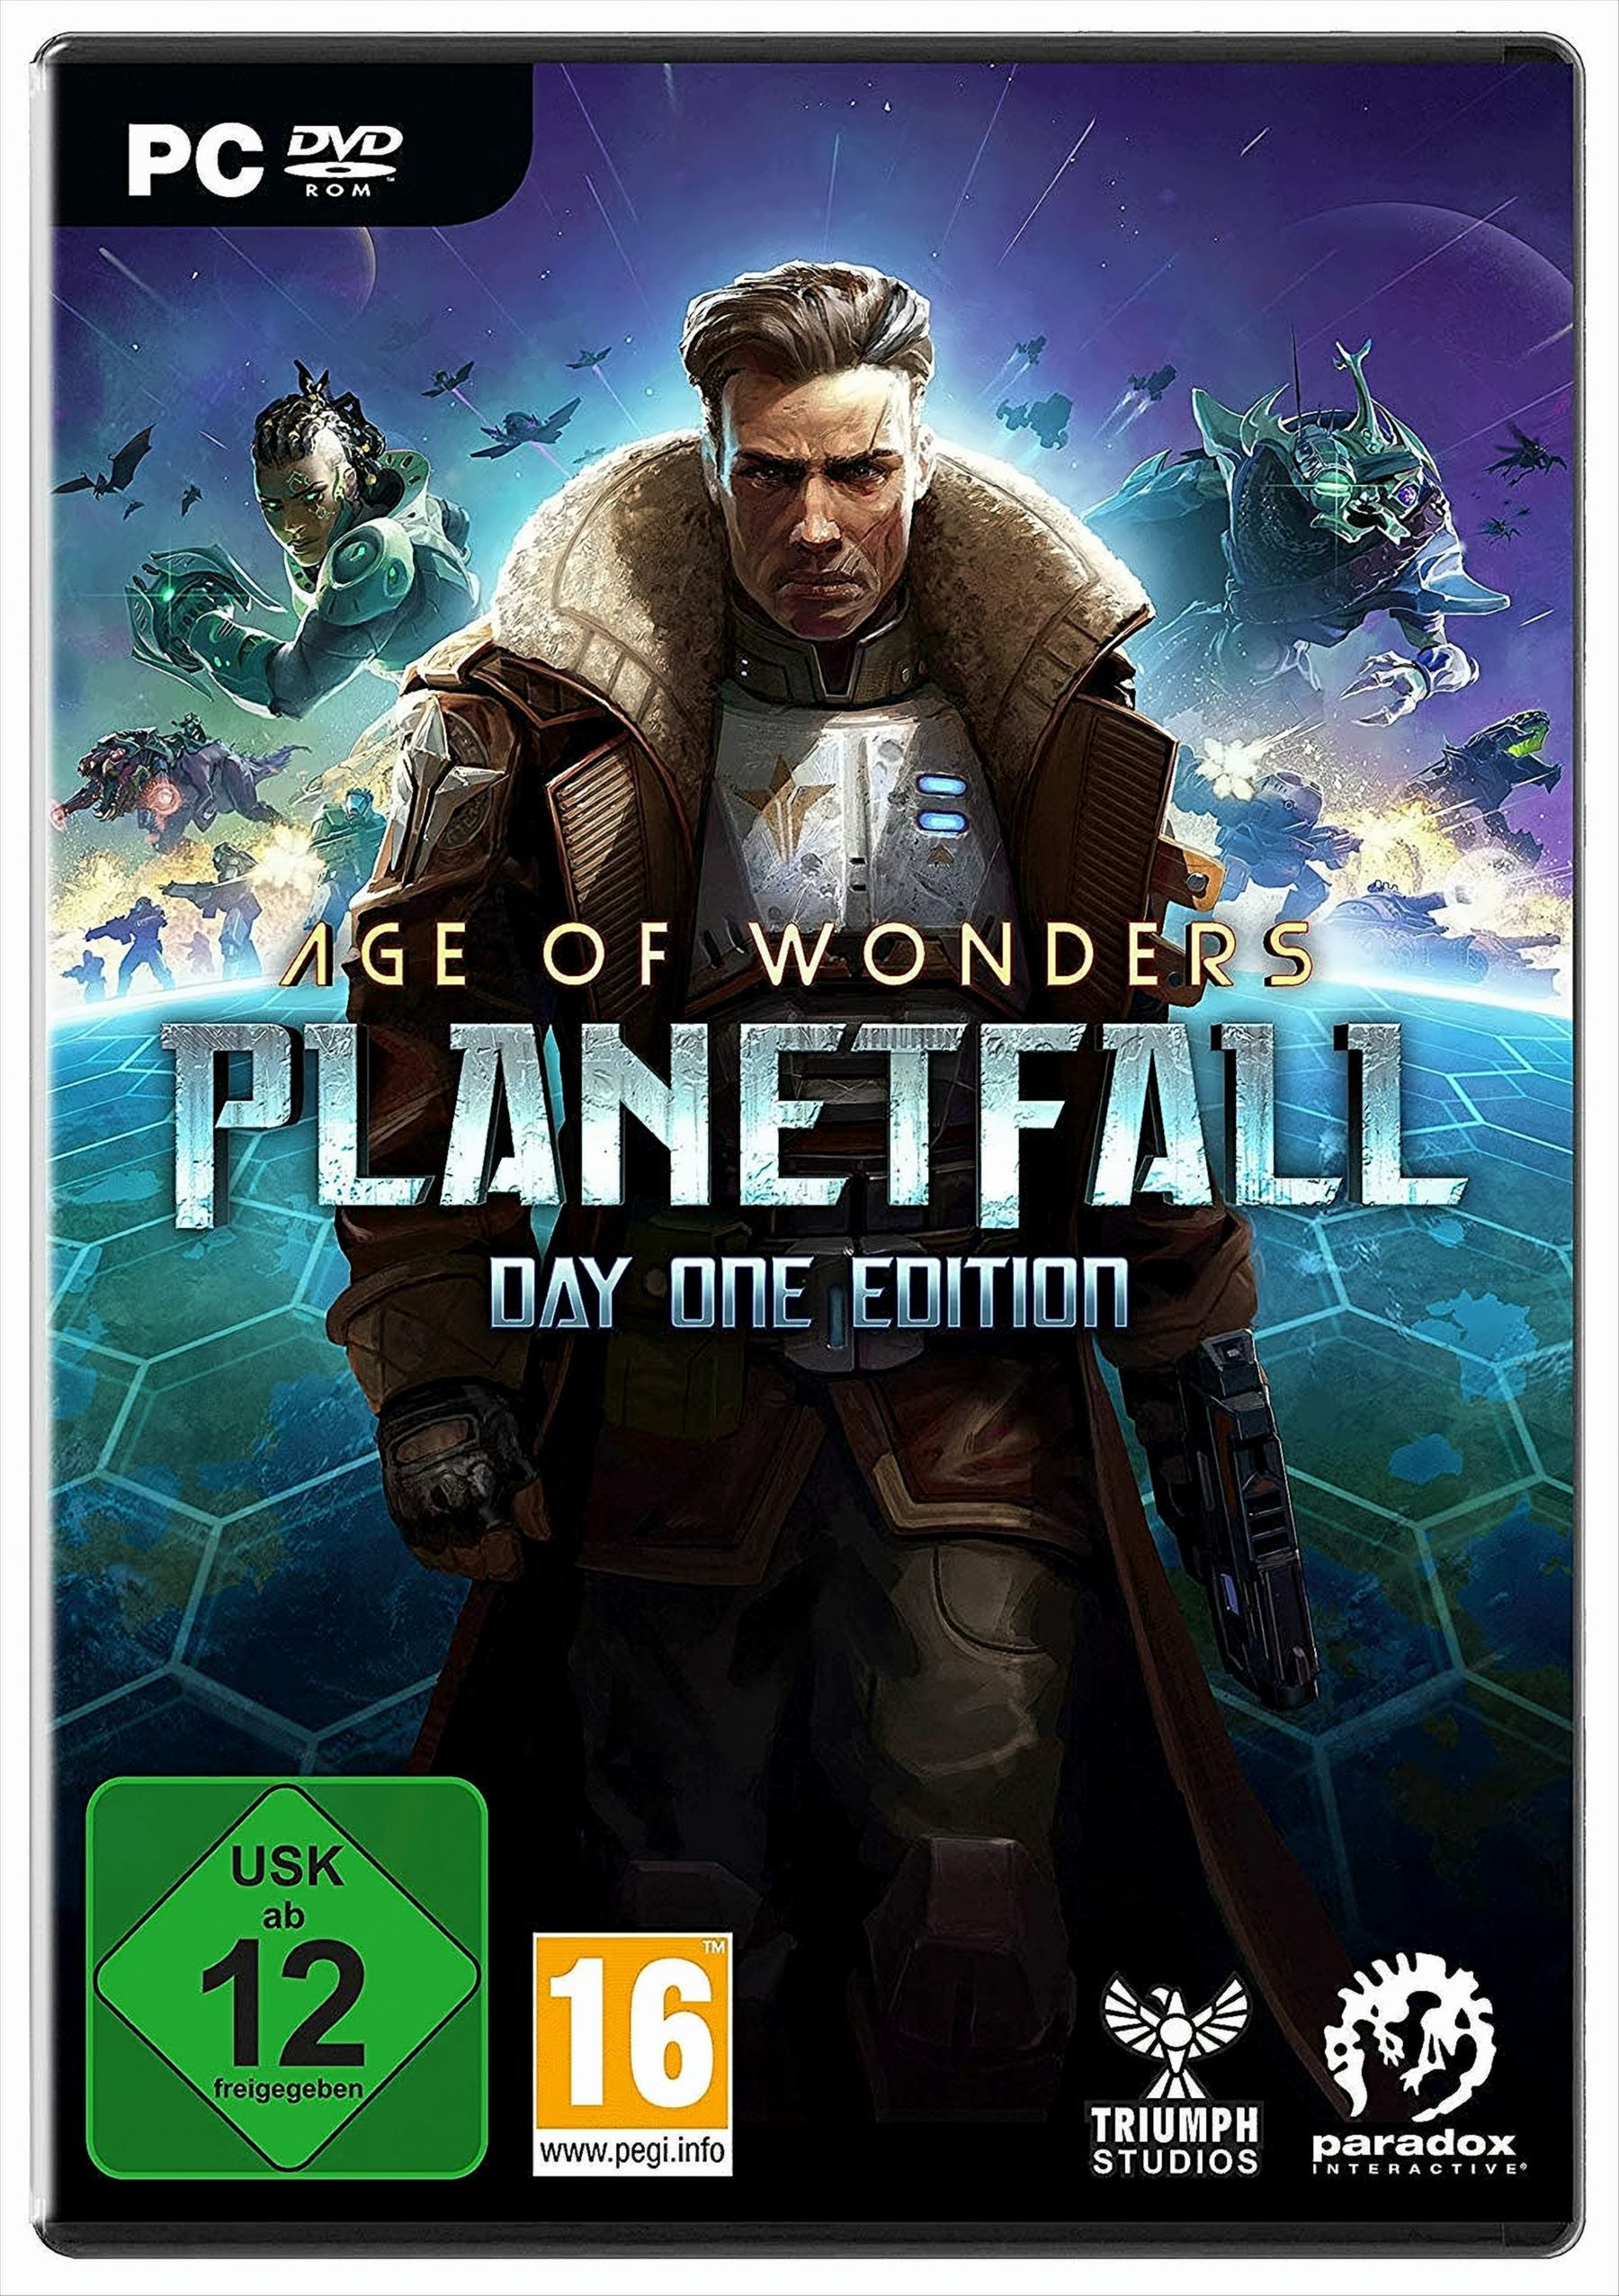 Wonders: Edition Age Planetfall of Day [PC] - One